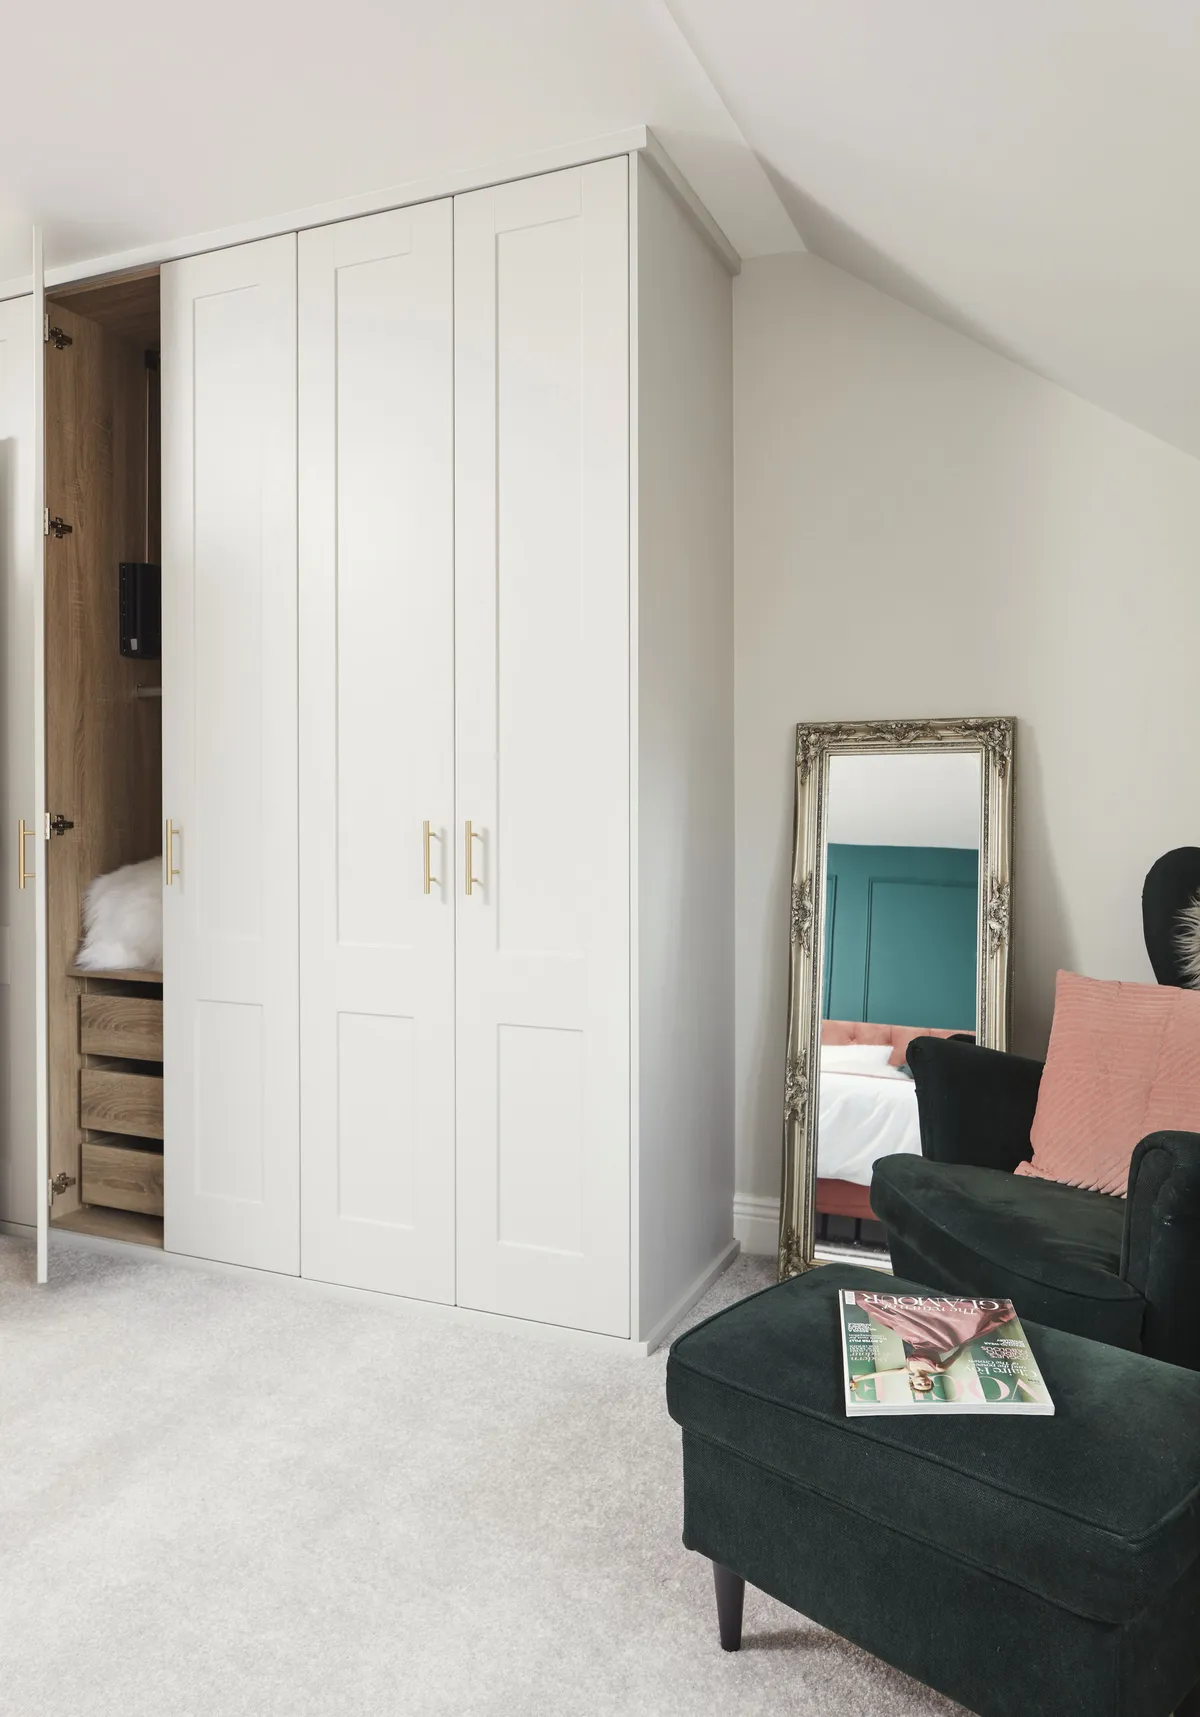 The unobtrusive bank of built-in wardrobes provides extra storage and keeps the space clutter-free. Painted in the same colour as the walls, French Grey Pale by Little Greene, it doesn’t dominate the space